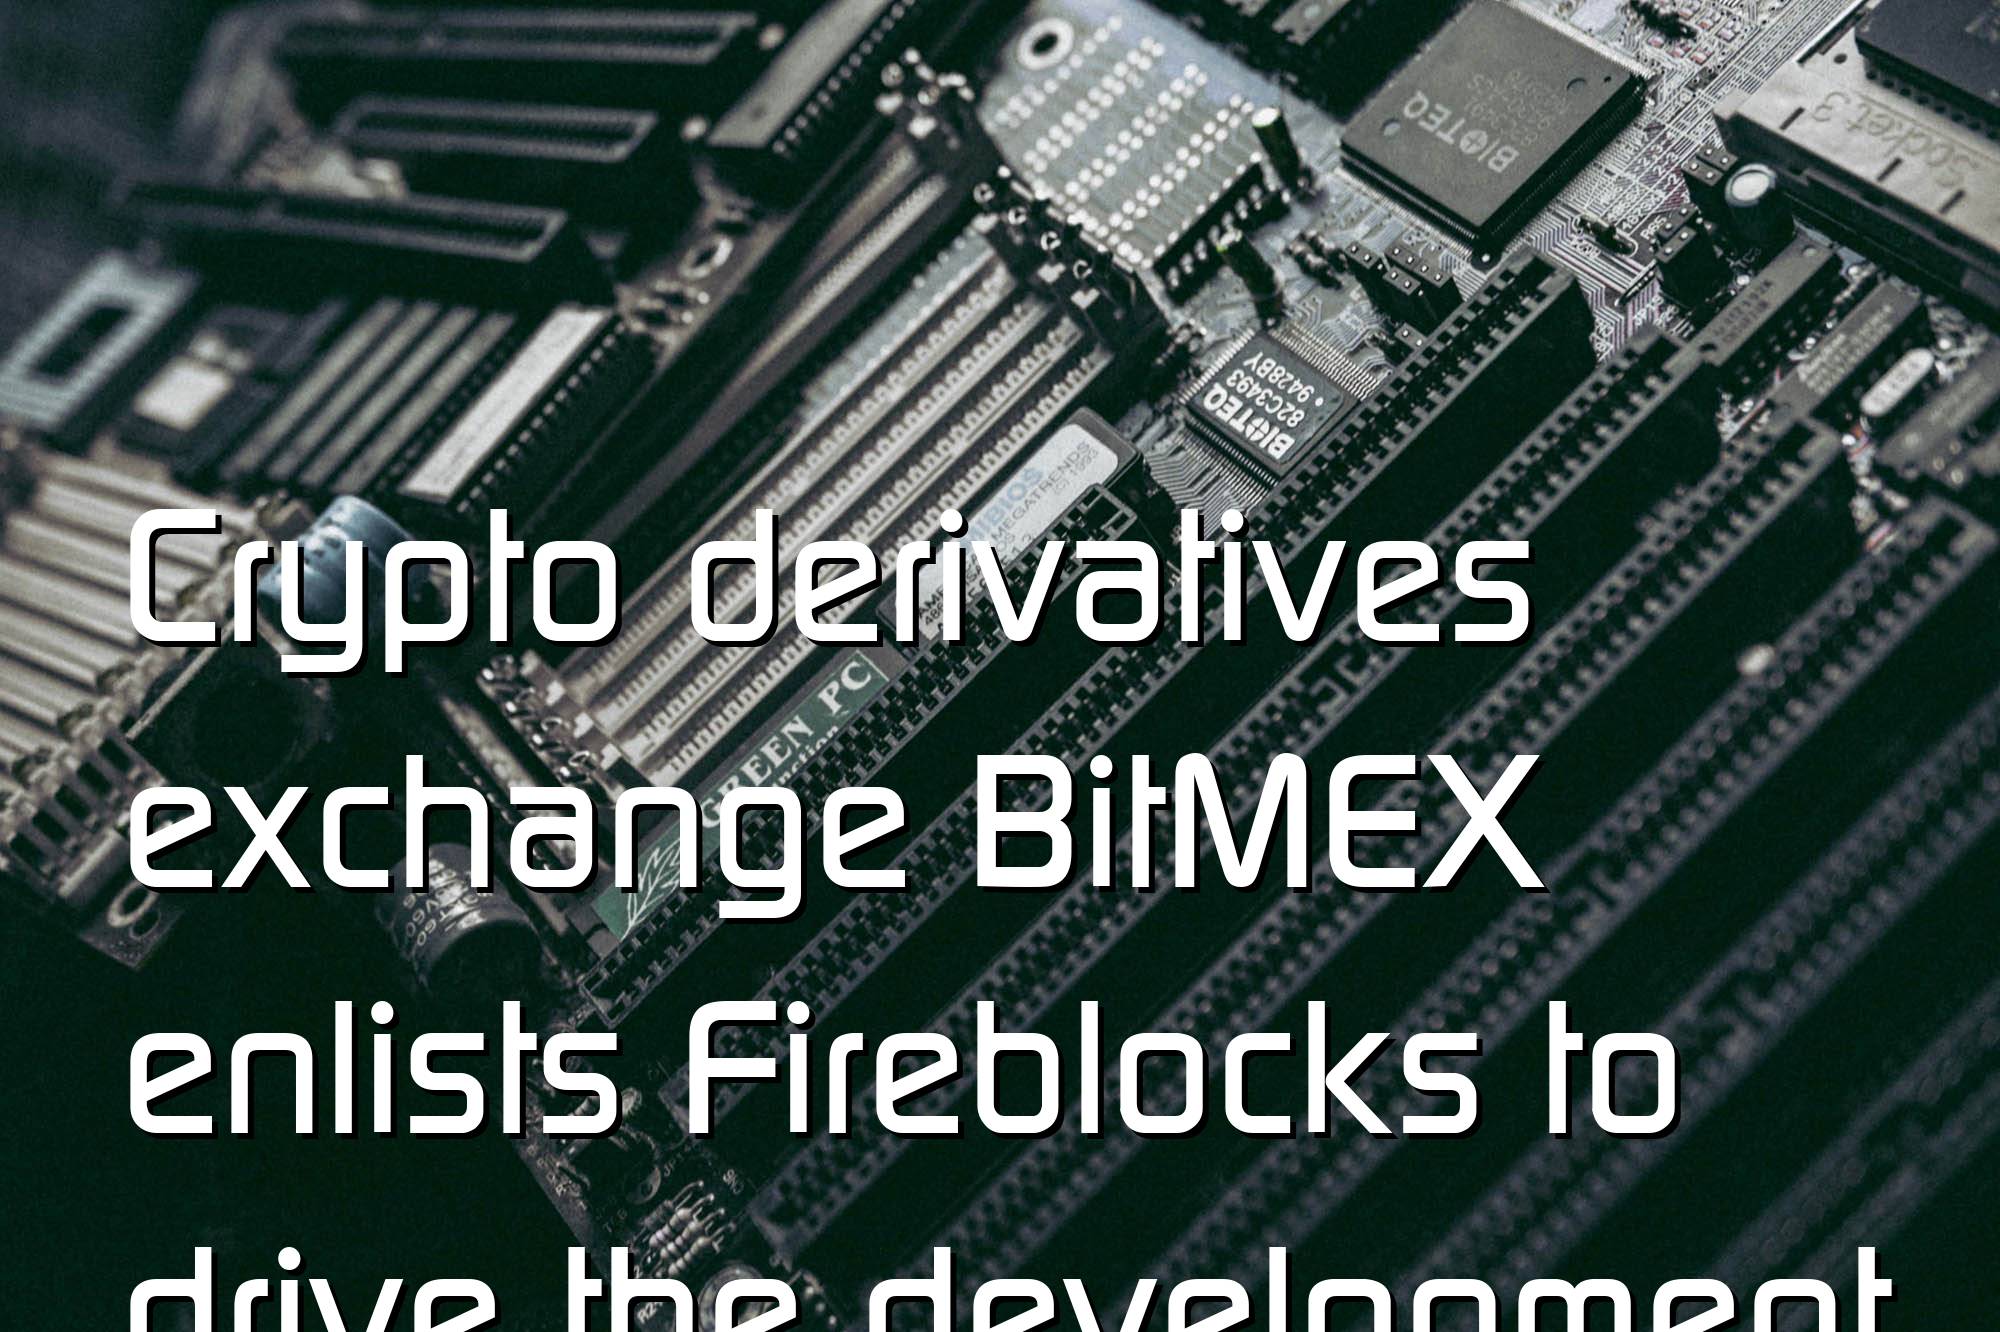 @$61306.24 Crypto derivatives exchange BitMEX enlists Fireblocks to drive the development of new offerings